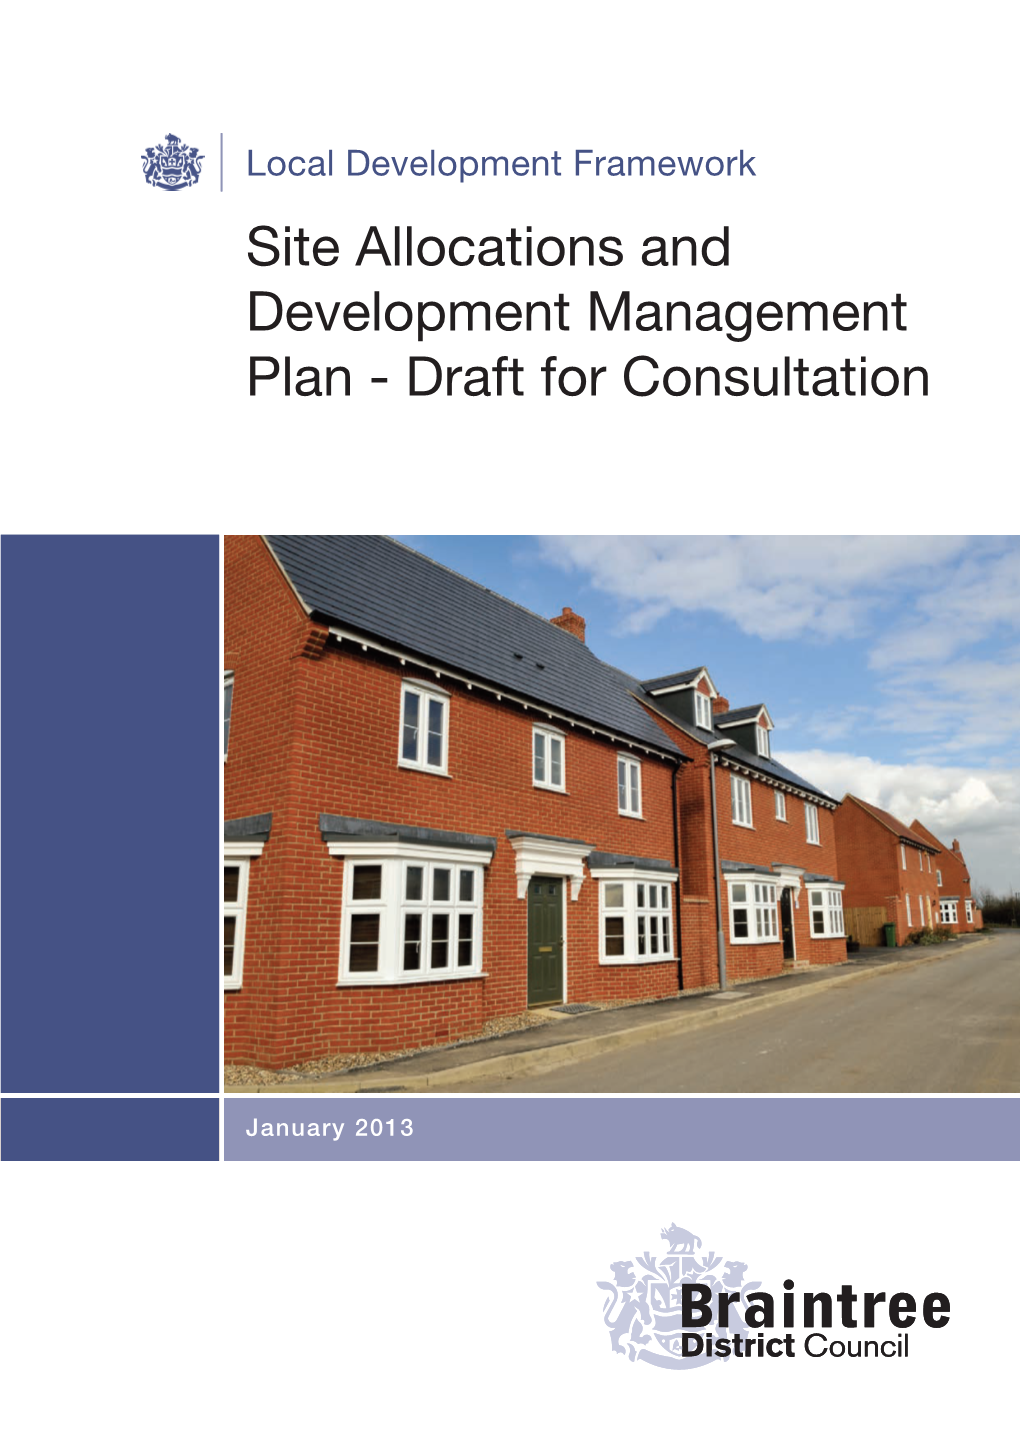 Site Allocations and Development Management Plan - Draft for Consultation